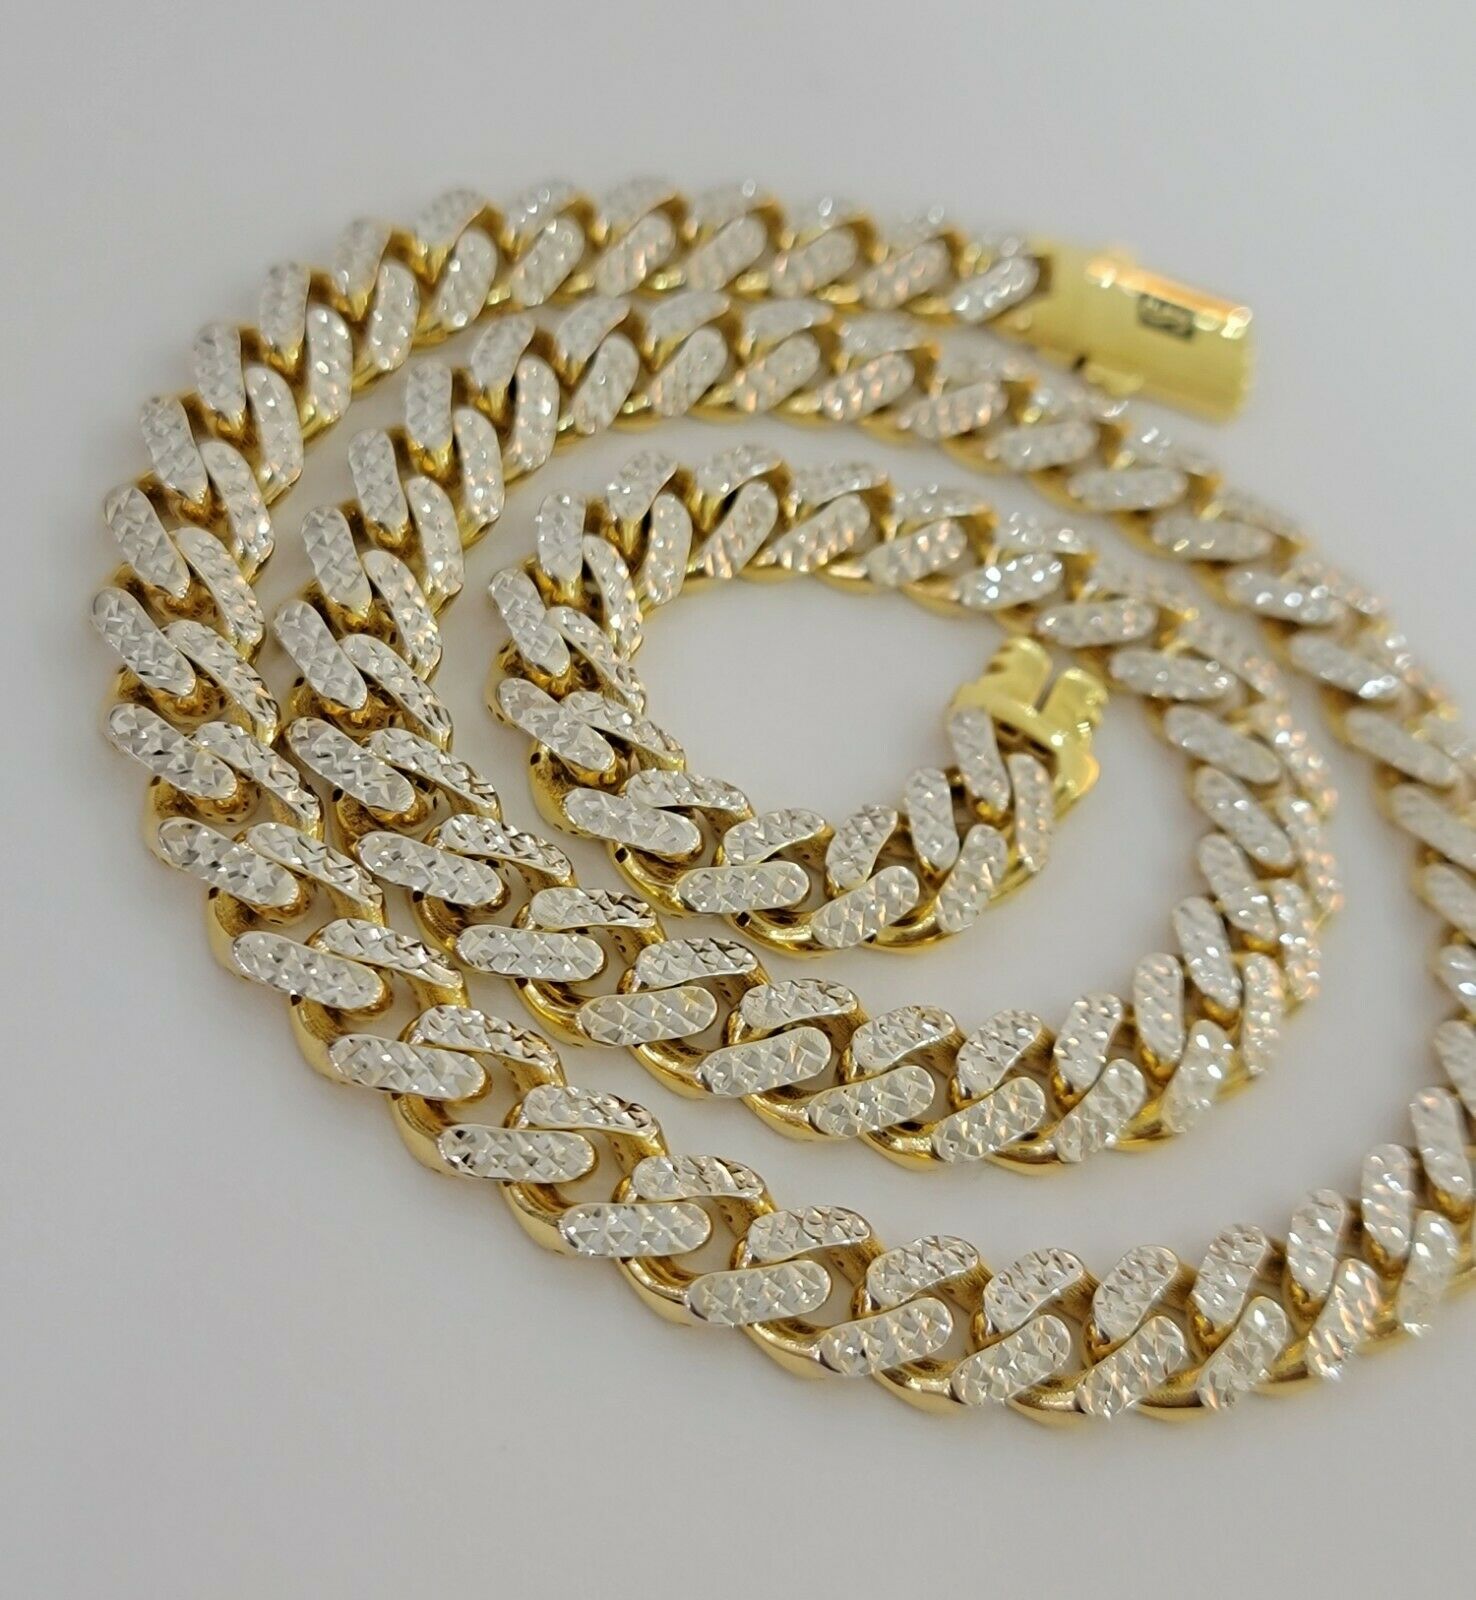 10k Gold Monaco Chain Necklace 9mm 24" Two-tone Diamond Cut REAL 10kt Gold SALE